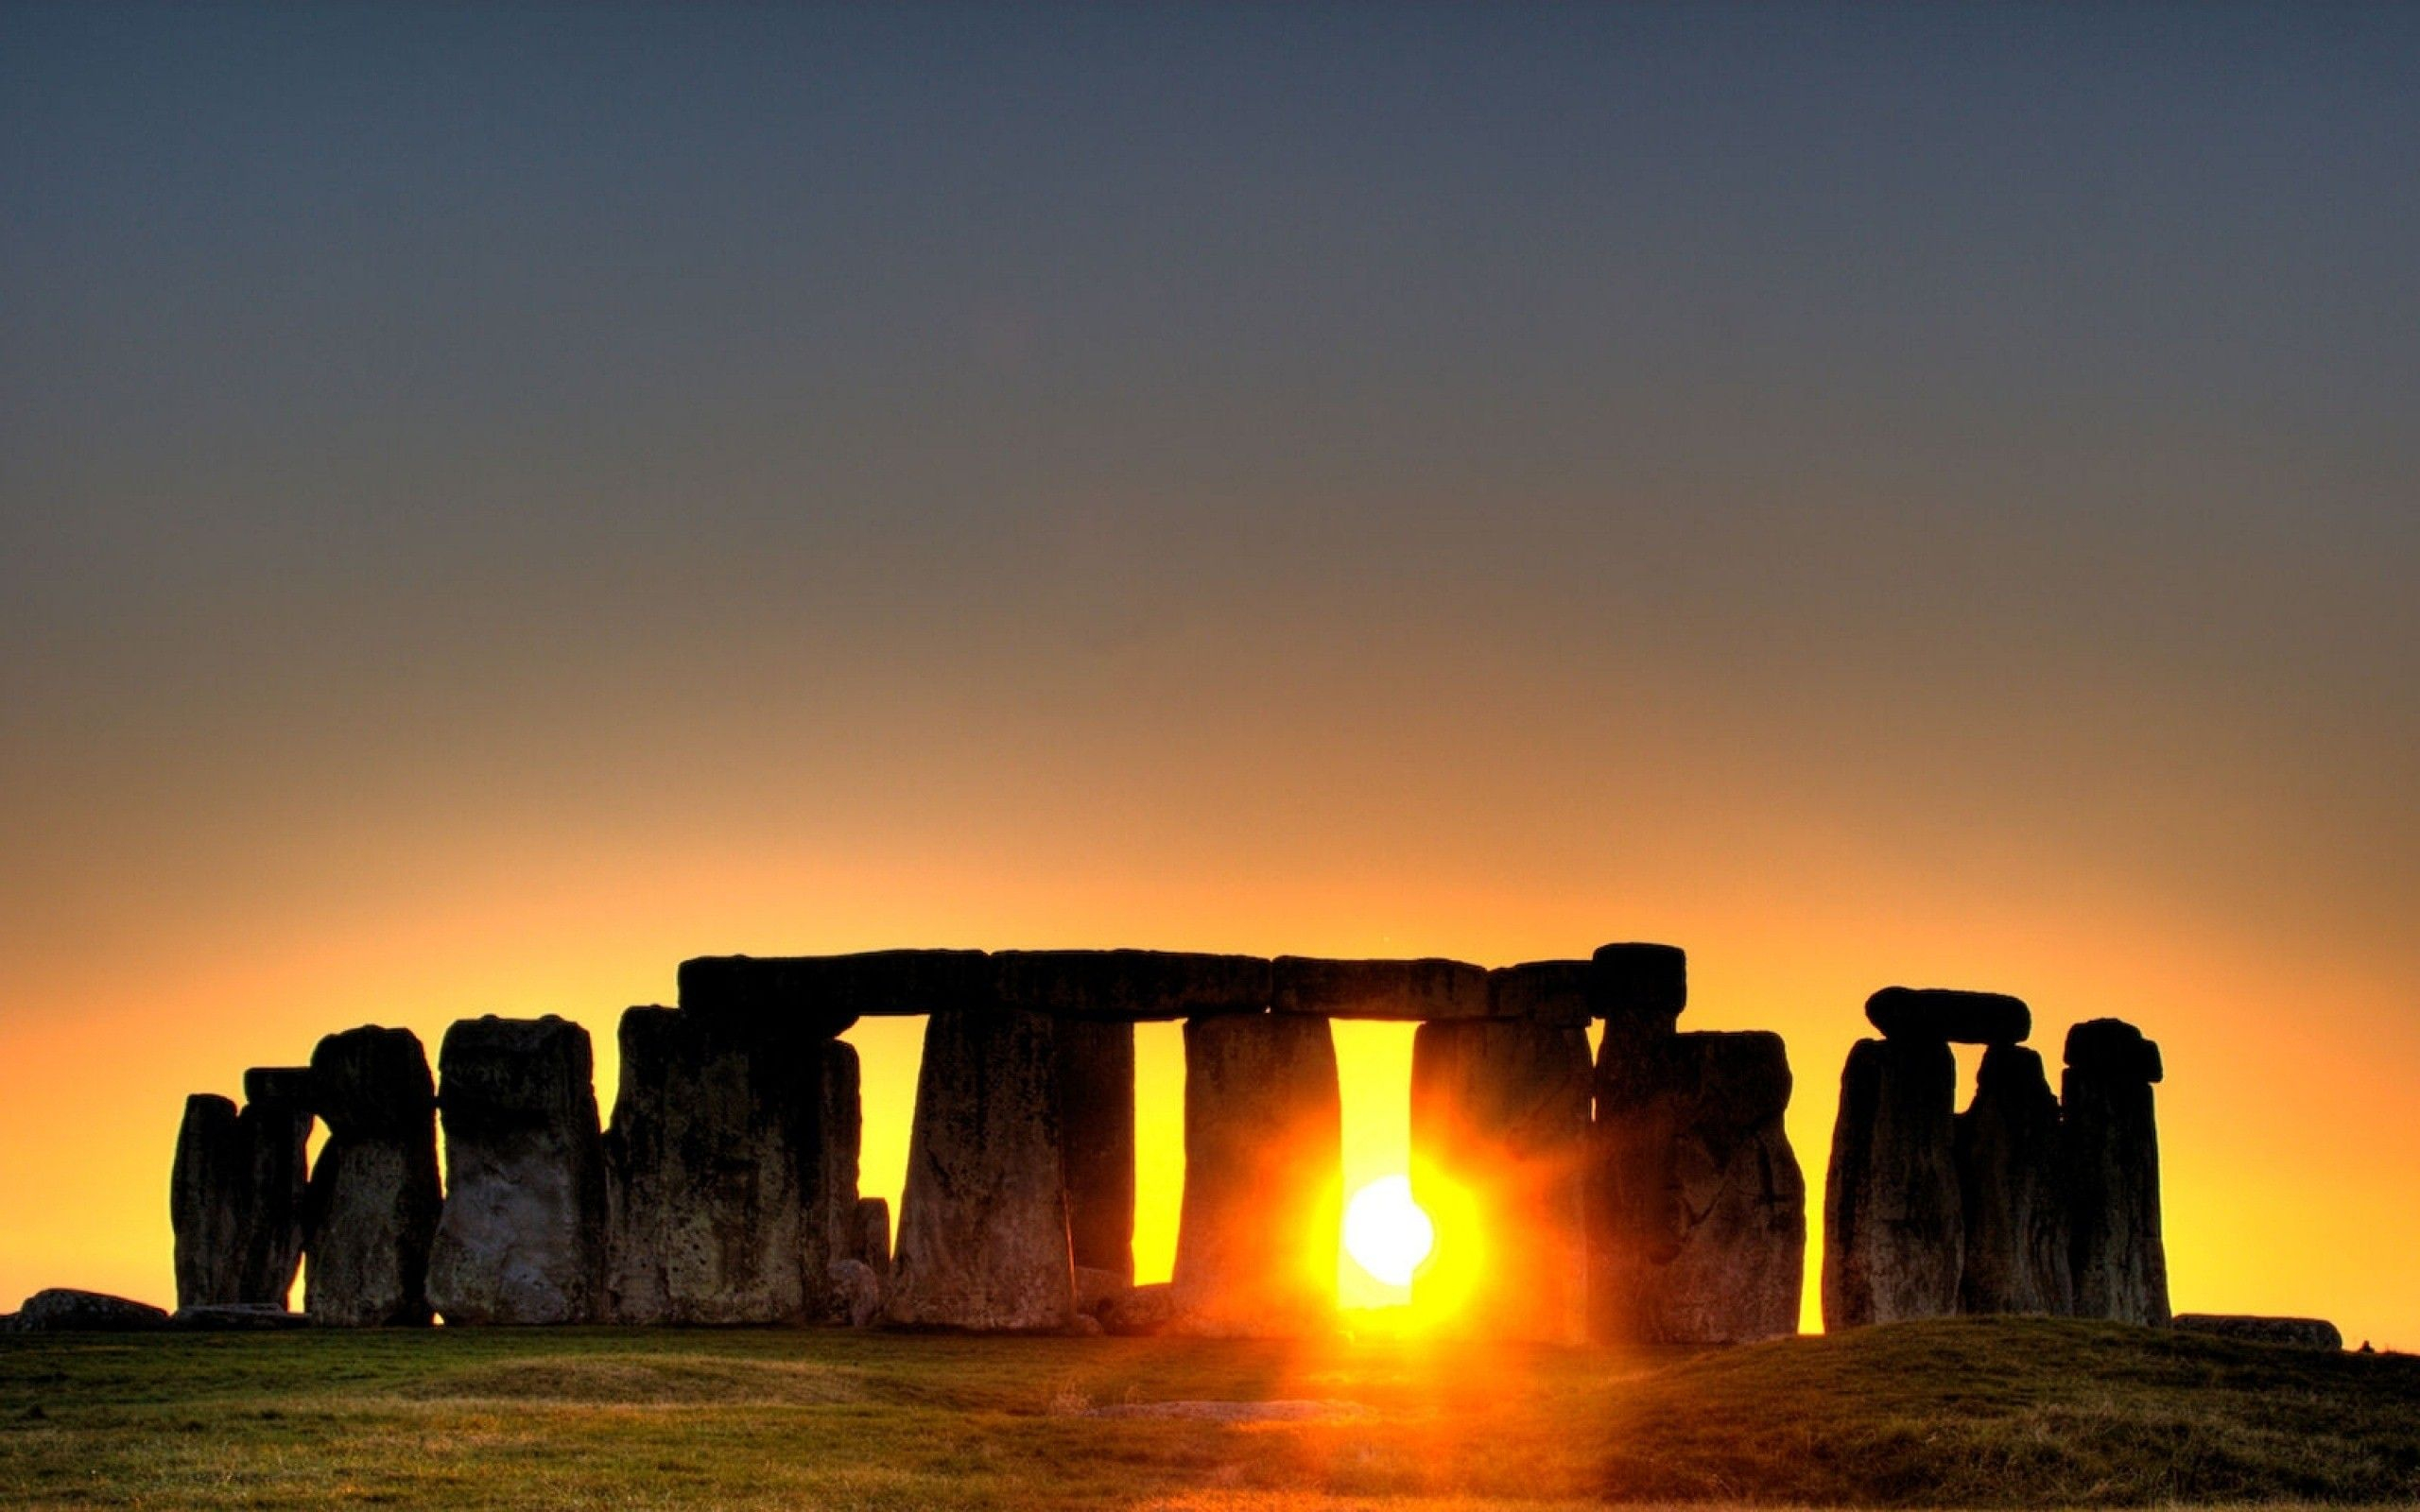 2560x1600 Stonehenge Sunset Located in England HD Wallpaper | HD Photos, Wallpapers, Images | Best sunset, Stonehenge, Beautiful sunset